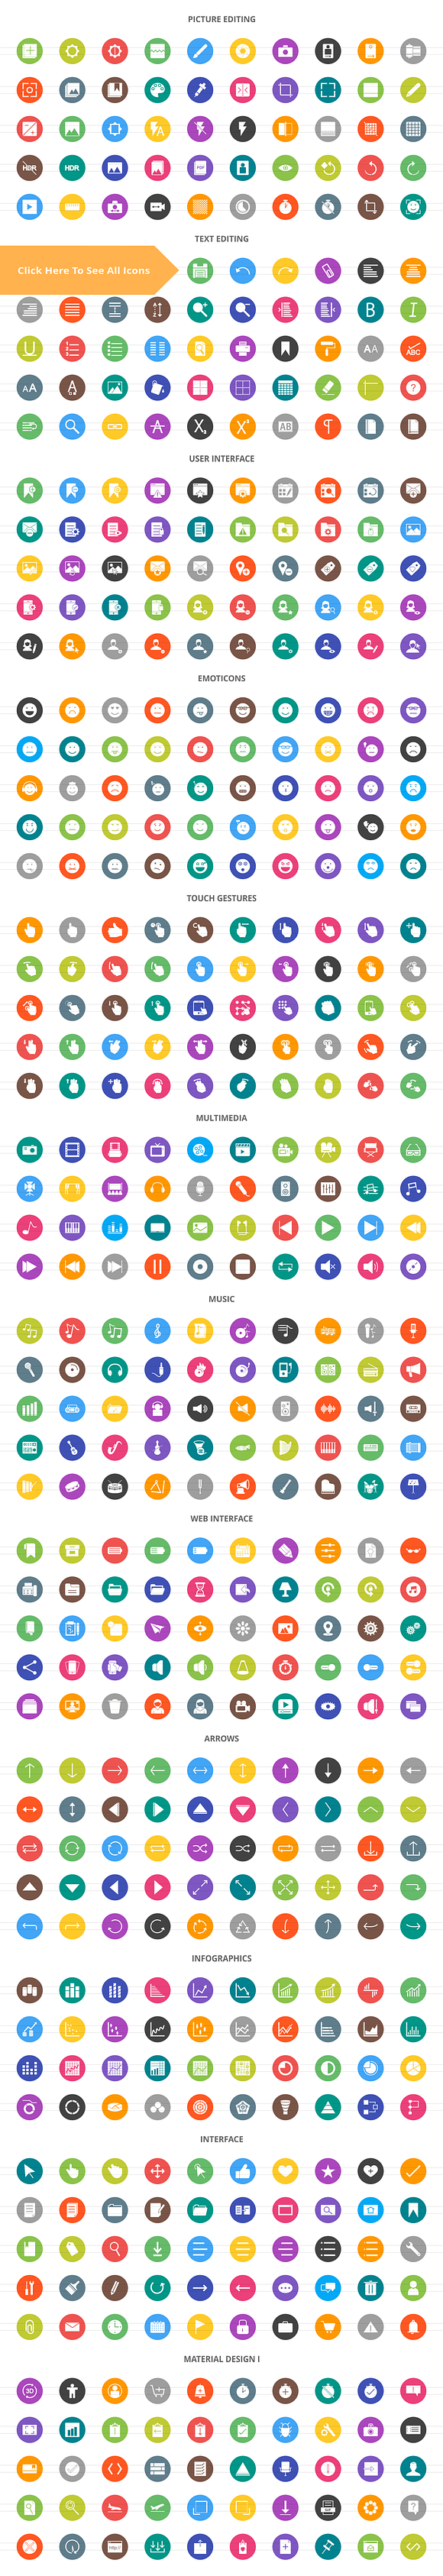 1779 Digital Filled Round Icons in Graphics - product preview 1